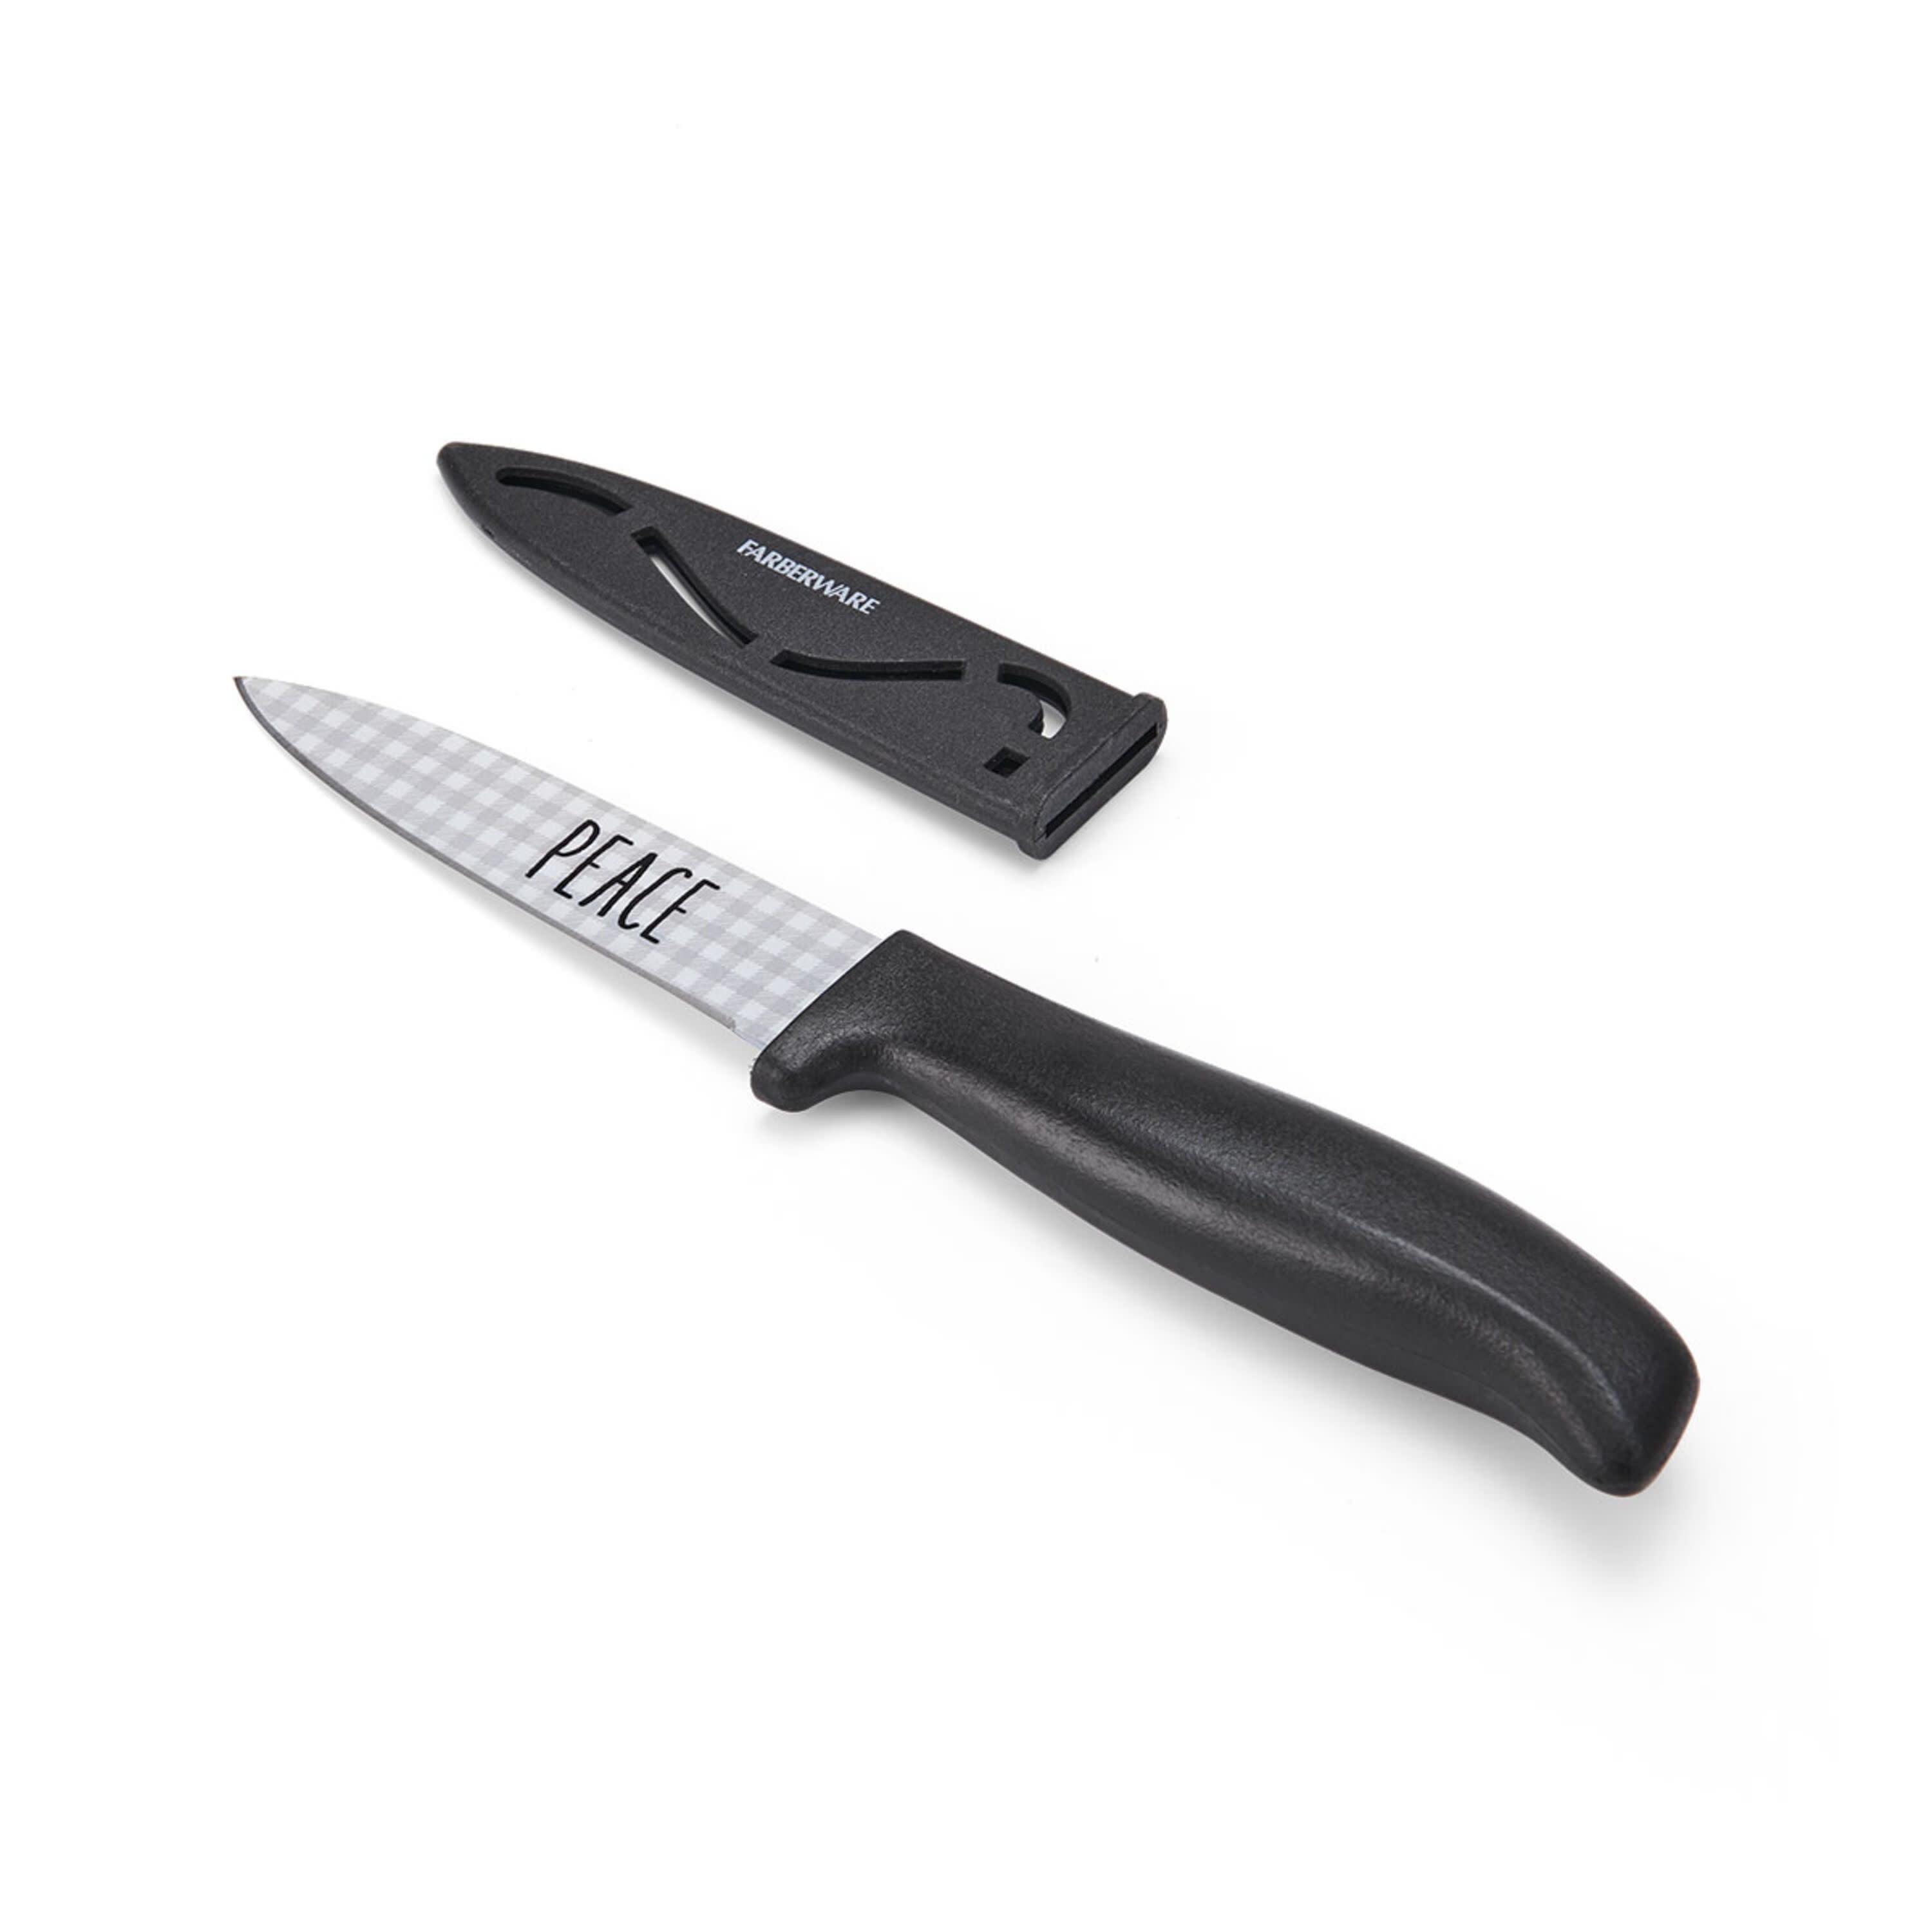 Farberware 6749436 2 Piece Colour Works Ceramic Paring Knife, 3.5 in., 2 -  Dillons Food Stores